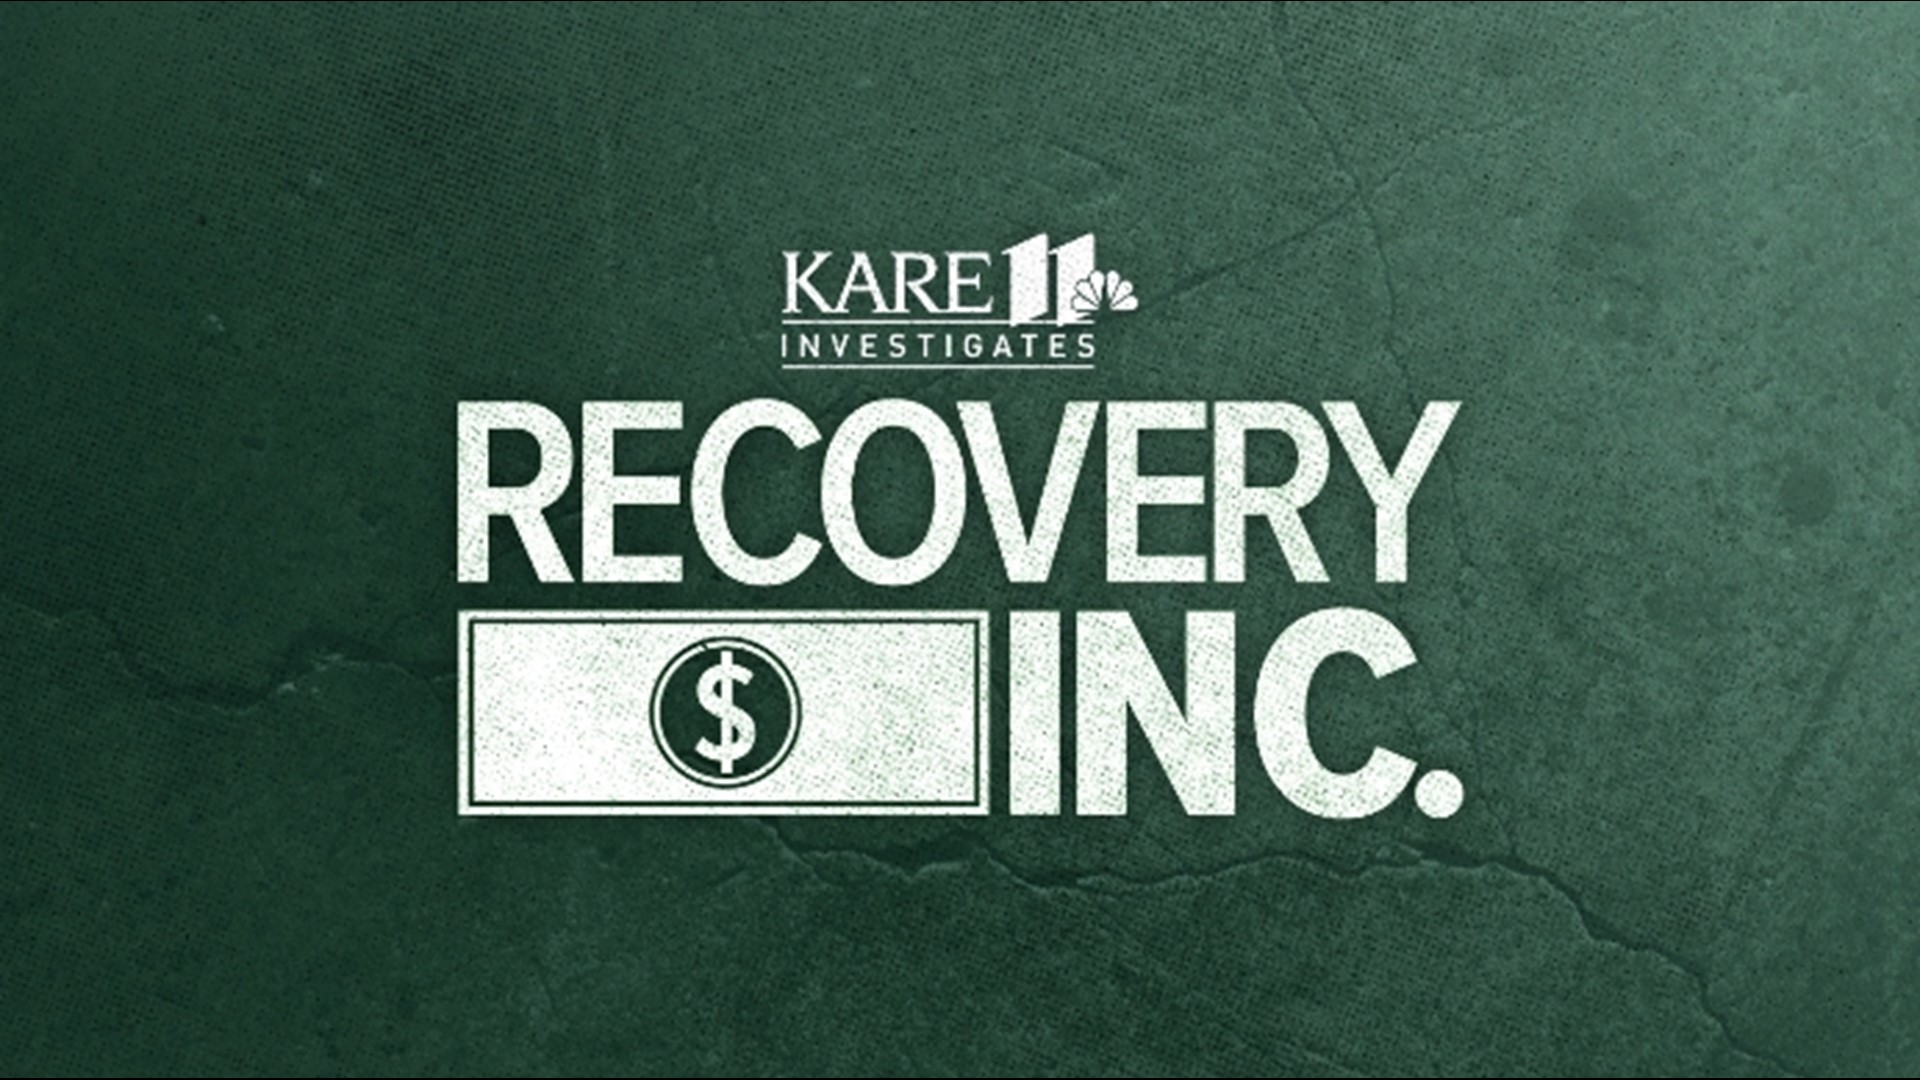 KARE 11’s reporting on allegations of improper Medicaid billing in addiction recovery program spurs calls for action from state lawmakers.